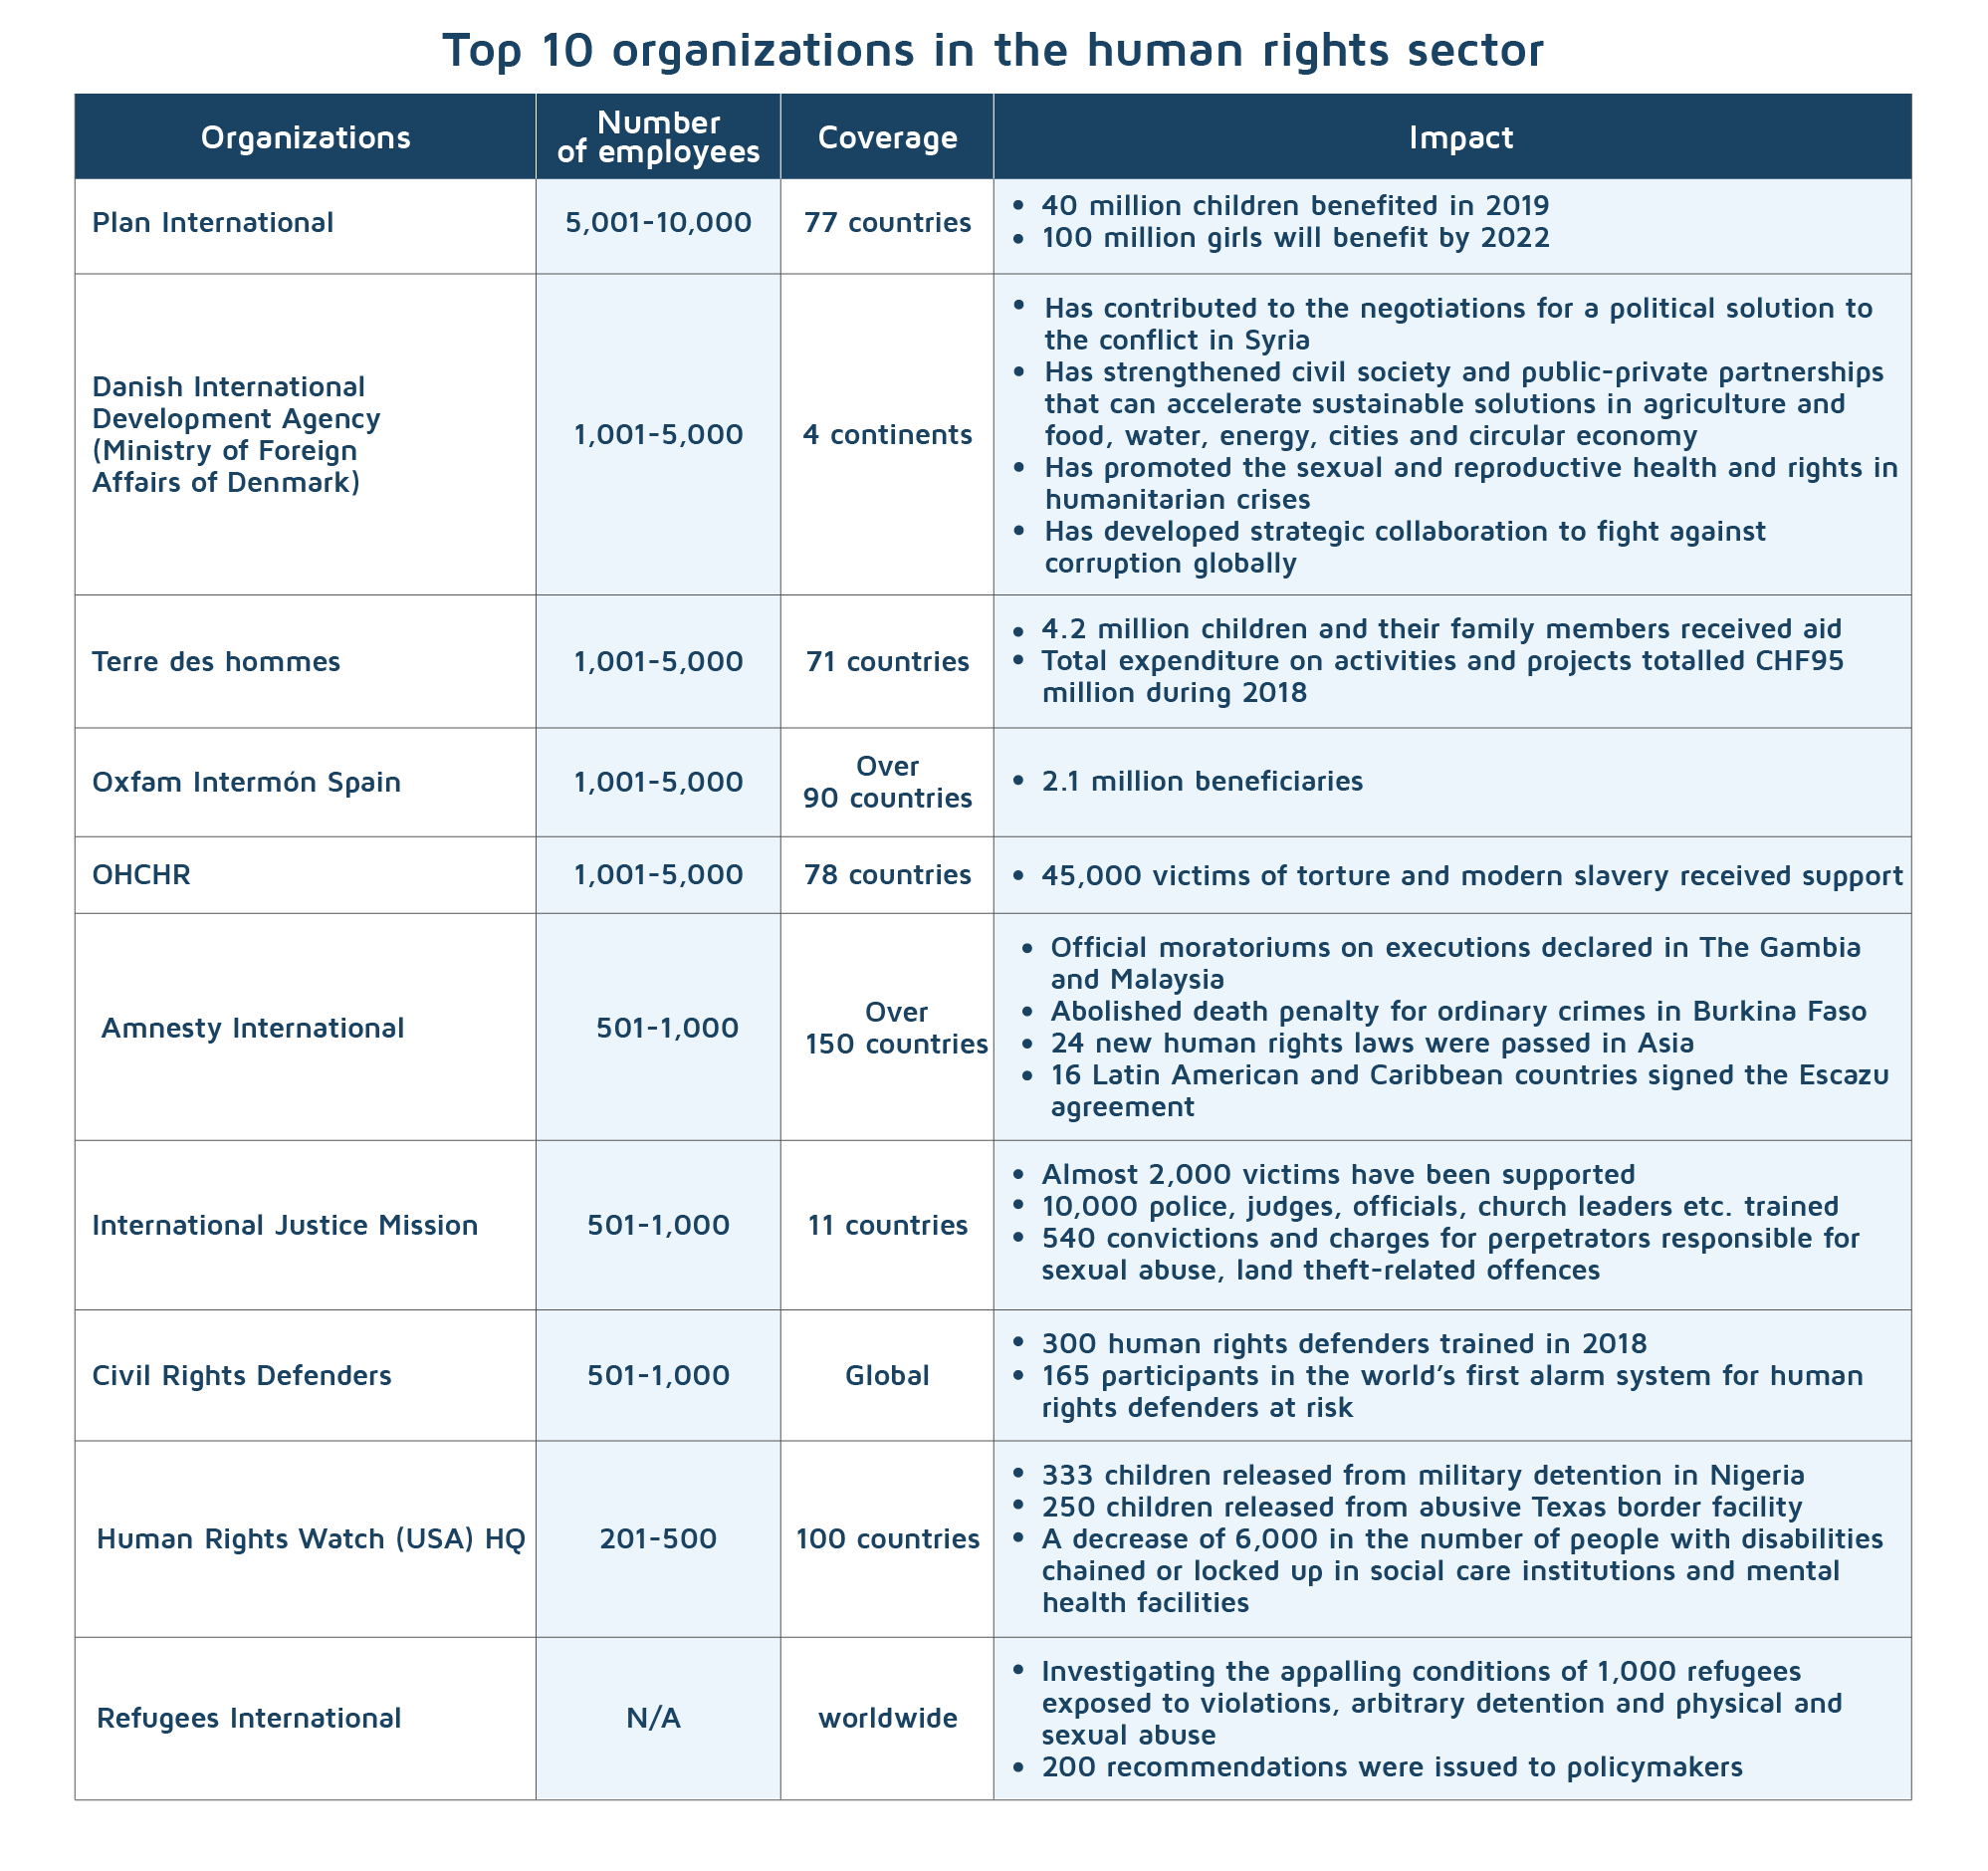 Top 10 human rights organizations_Top 10 organizations in the human rights sector